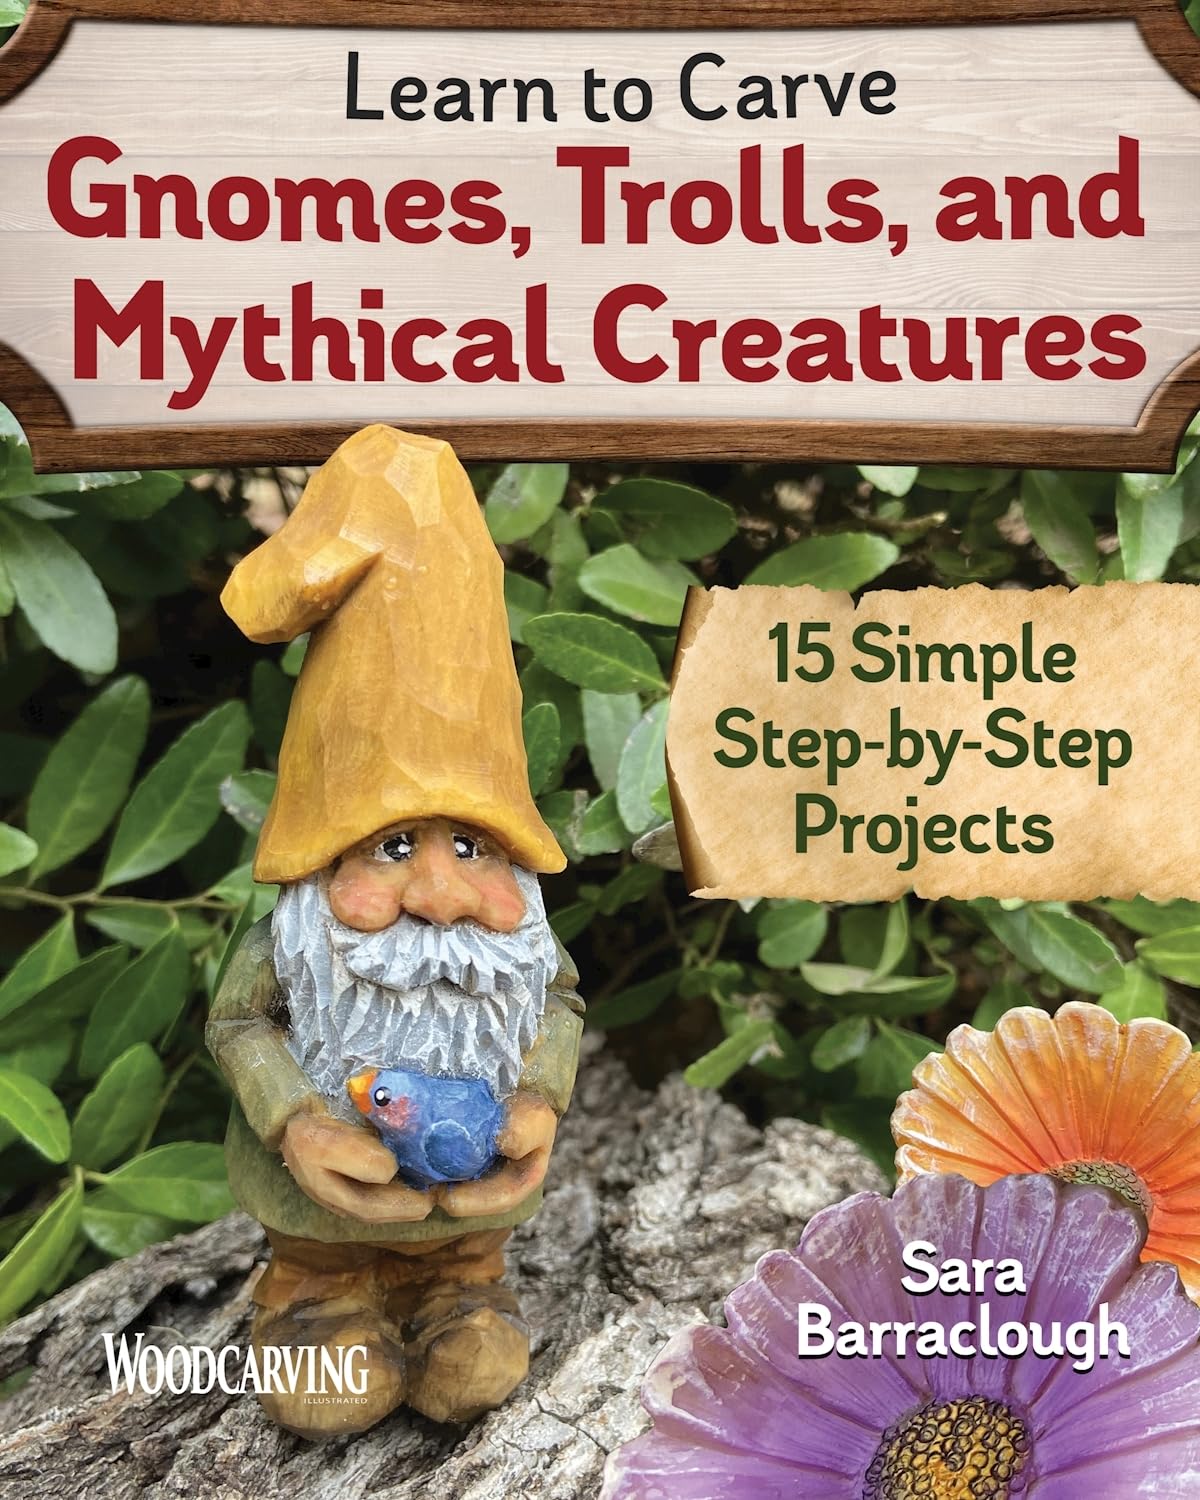 Learn to Carve Gnomes, Trolls, and Mythical Creatures: 15 Simple Step-by-Step Projects (Fox Chapel Publishing) Woodcarving Plans & Instructions for a